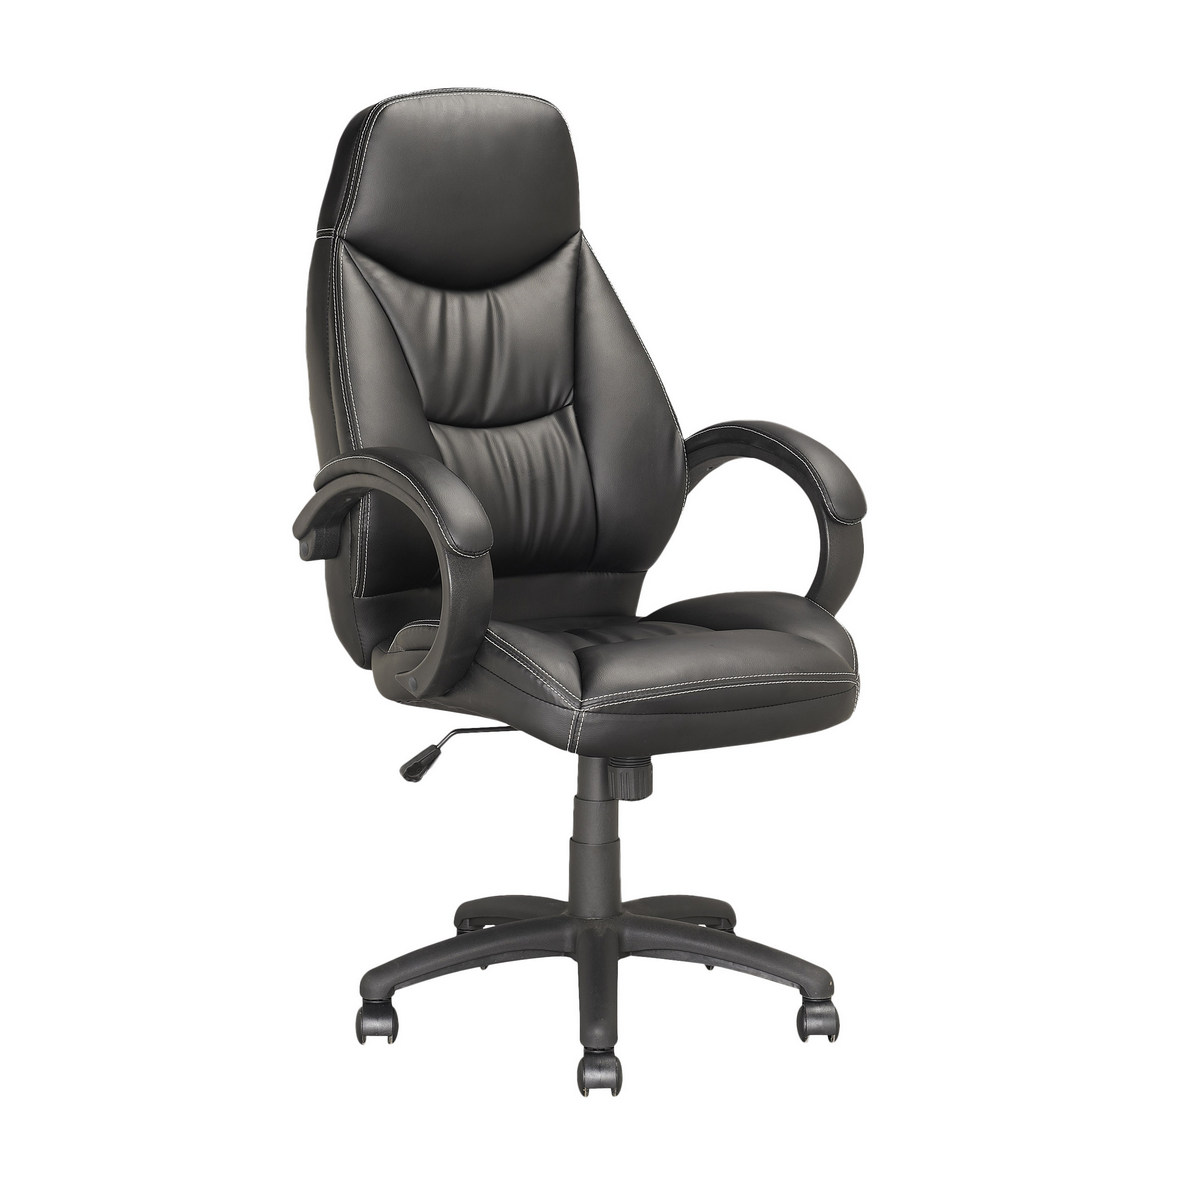 Corliving Lof-508-o Workspace Executive Office Chair In Black Leatherette